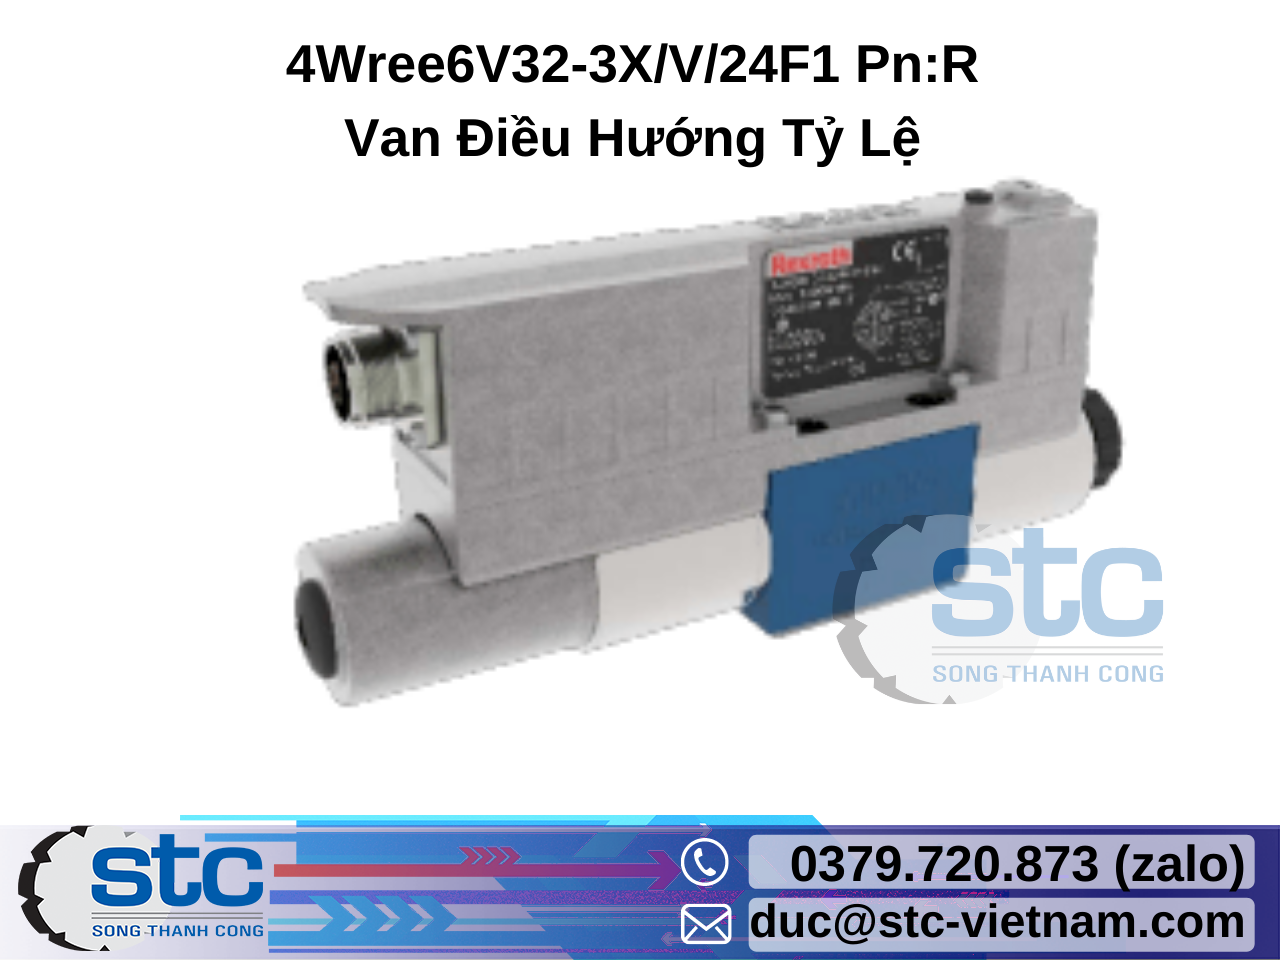 4wree6v32-3x-v-24f1-pn-r-van-dieu-huong-ty-le-rexroth-germany.png